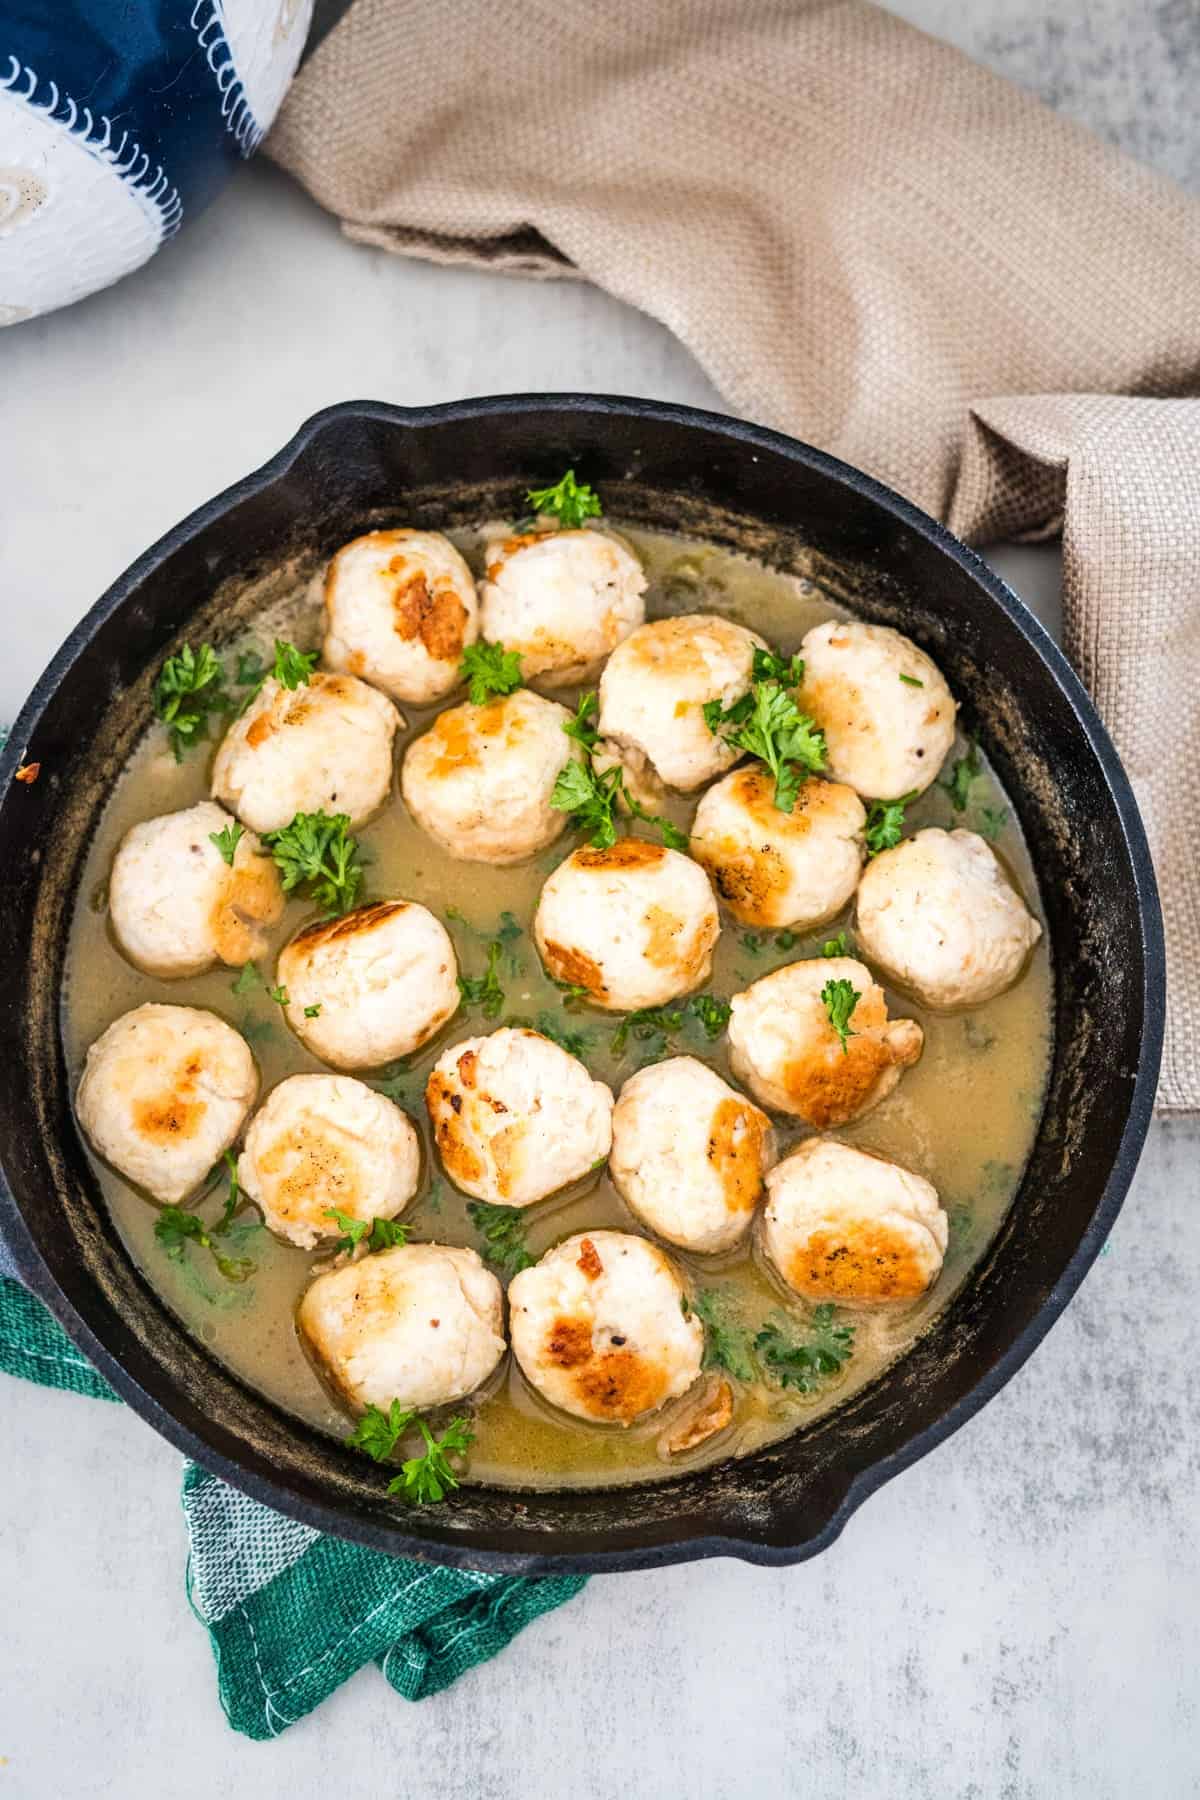 A cast iron skillet filled with seared scallops garnished with parsley, accompanied by a beige napkin on a light surface.